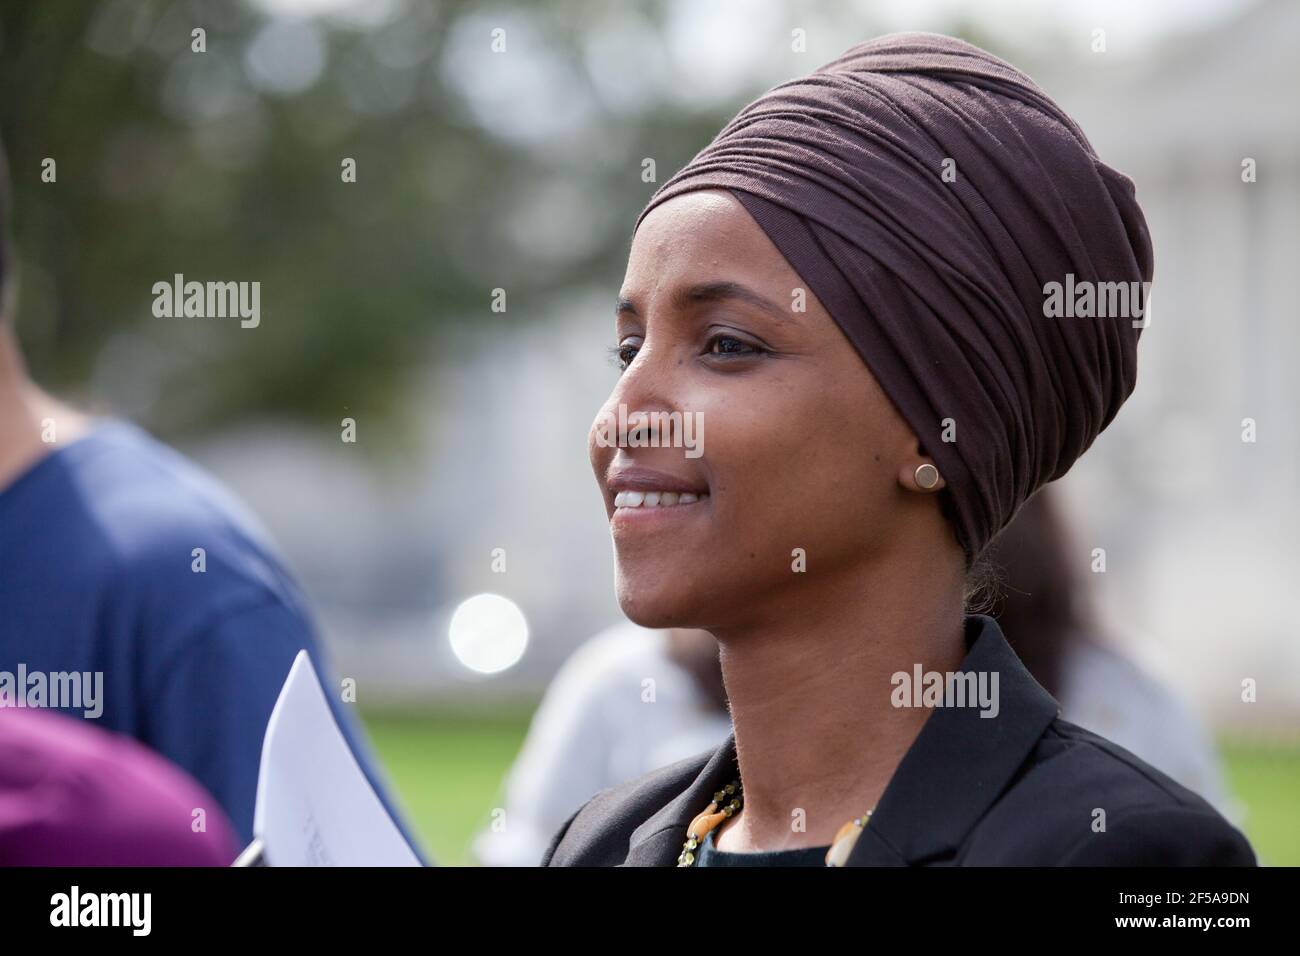 Sept. 26th, 2019, Washington, DC:  US Congresswoman Ilhan Omar (D-MN), Congresswoman Barbara Lee (D-CA), and Congressman Al Green (D-TX), speak at an 'Impeach Trump' rally, hosted by Progressive Democrats of America, in front of the US Capitol. Pictured: Rep. Ilhan Omar (D-MN) smiling. Stock Photo